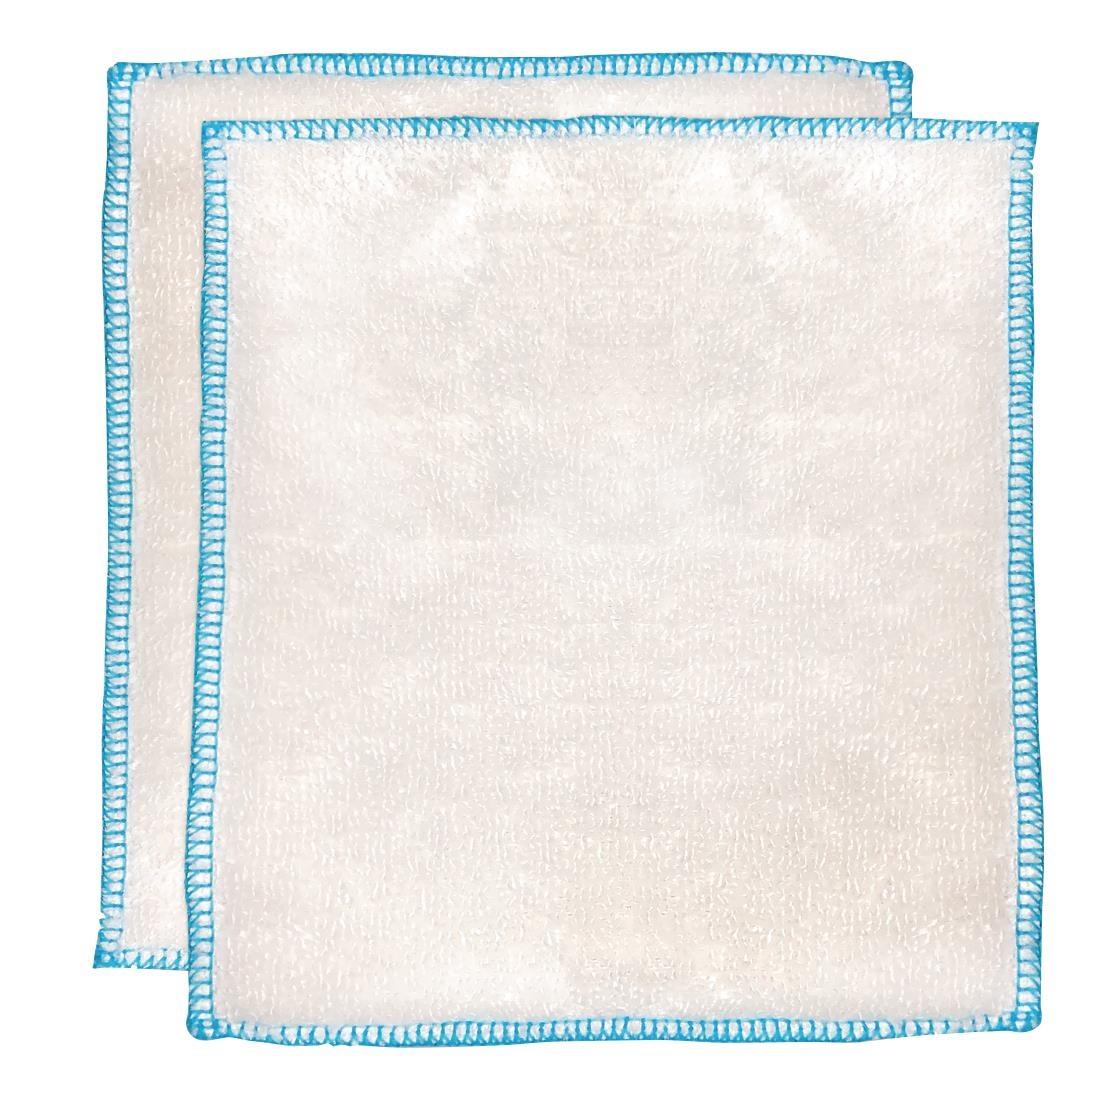 Puracycle Biodegradable Bamboo Cleaning Cloths (Pack of 2) - DA569  - 1